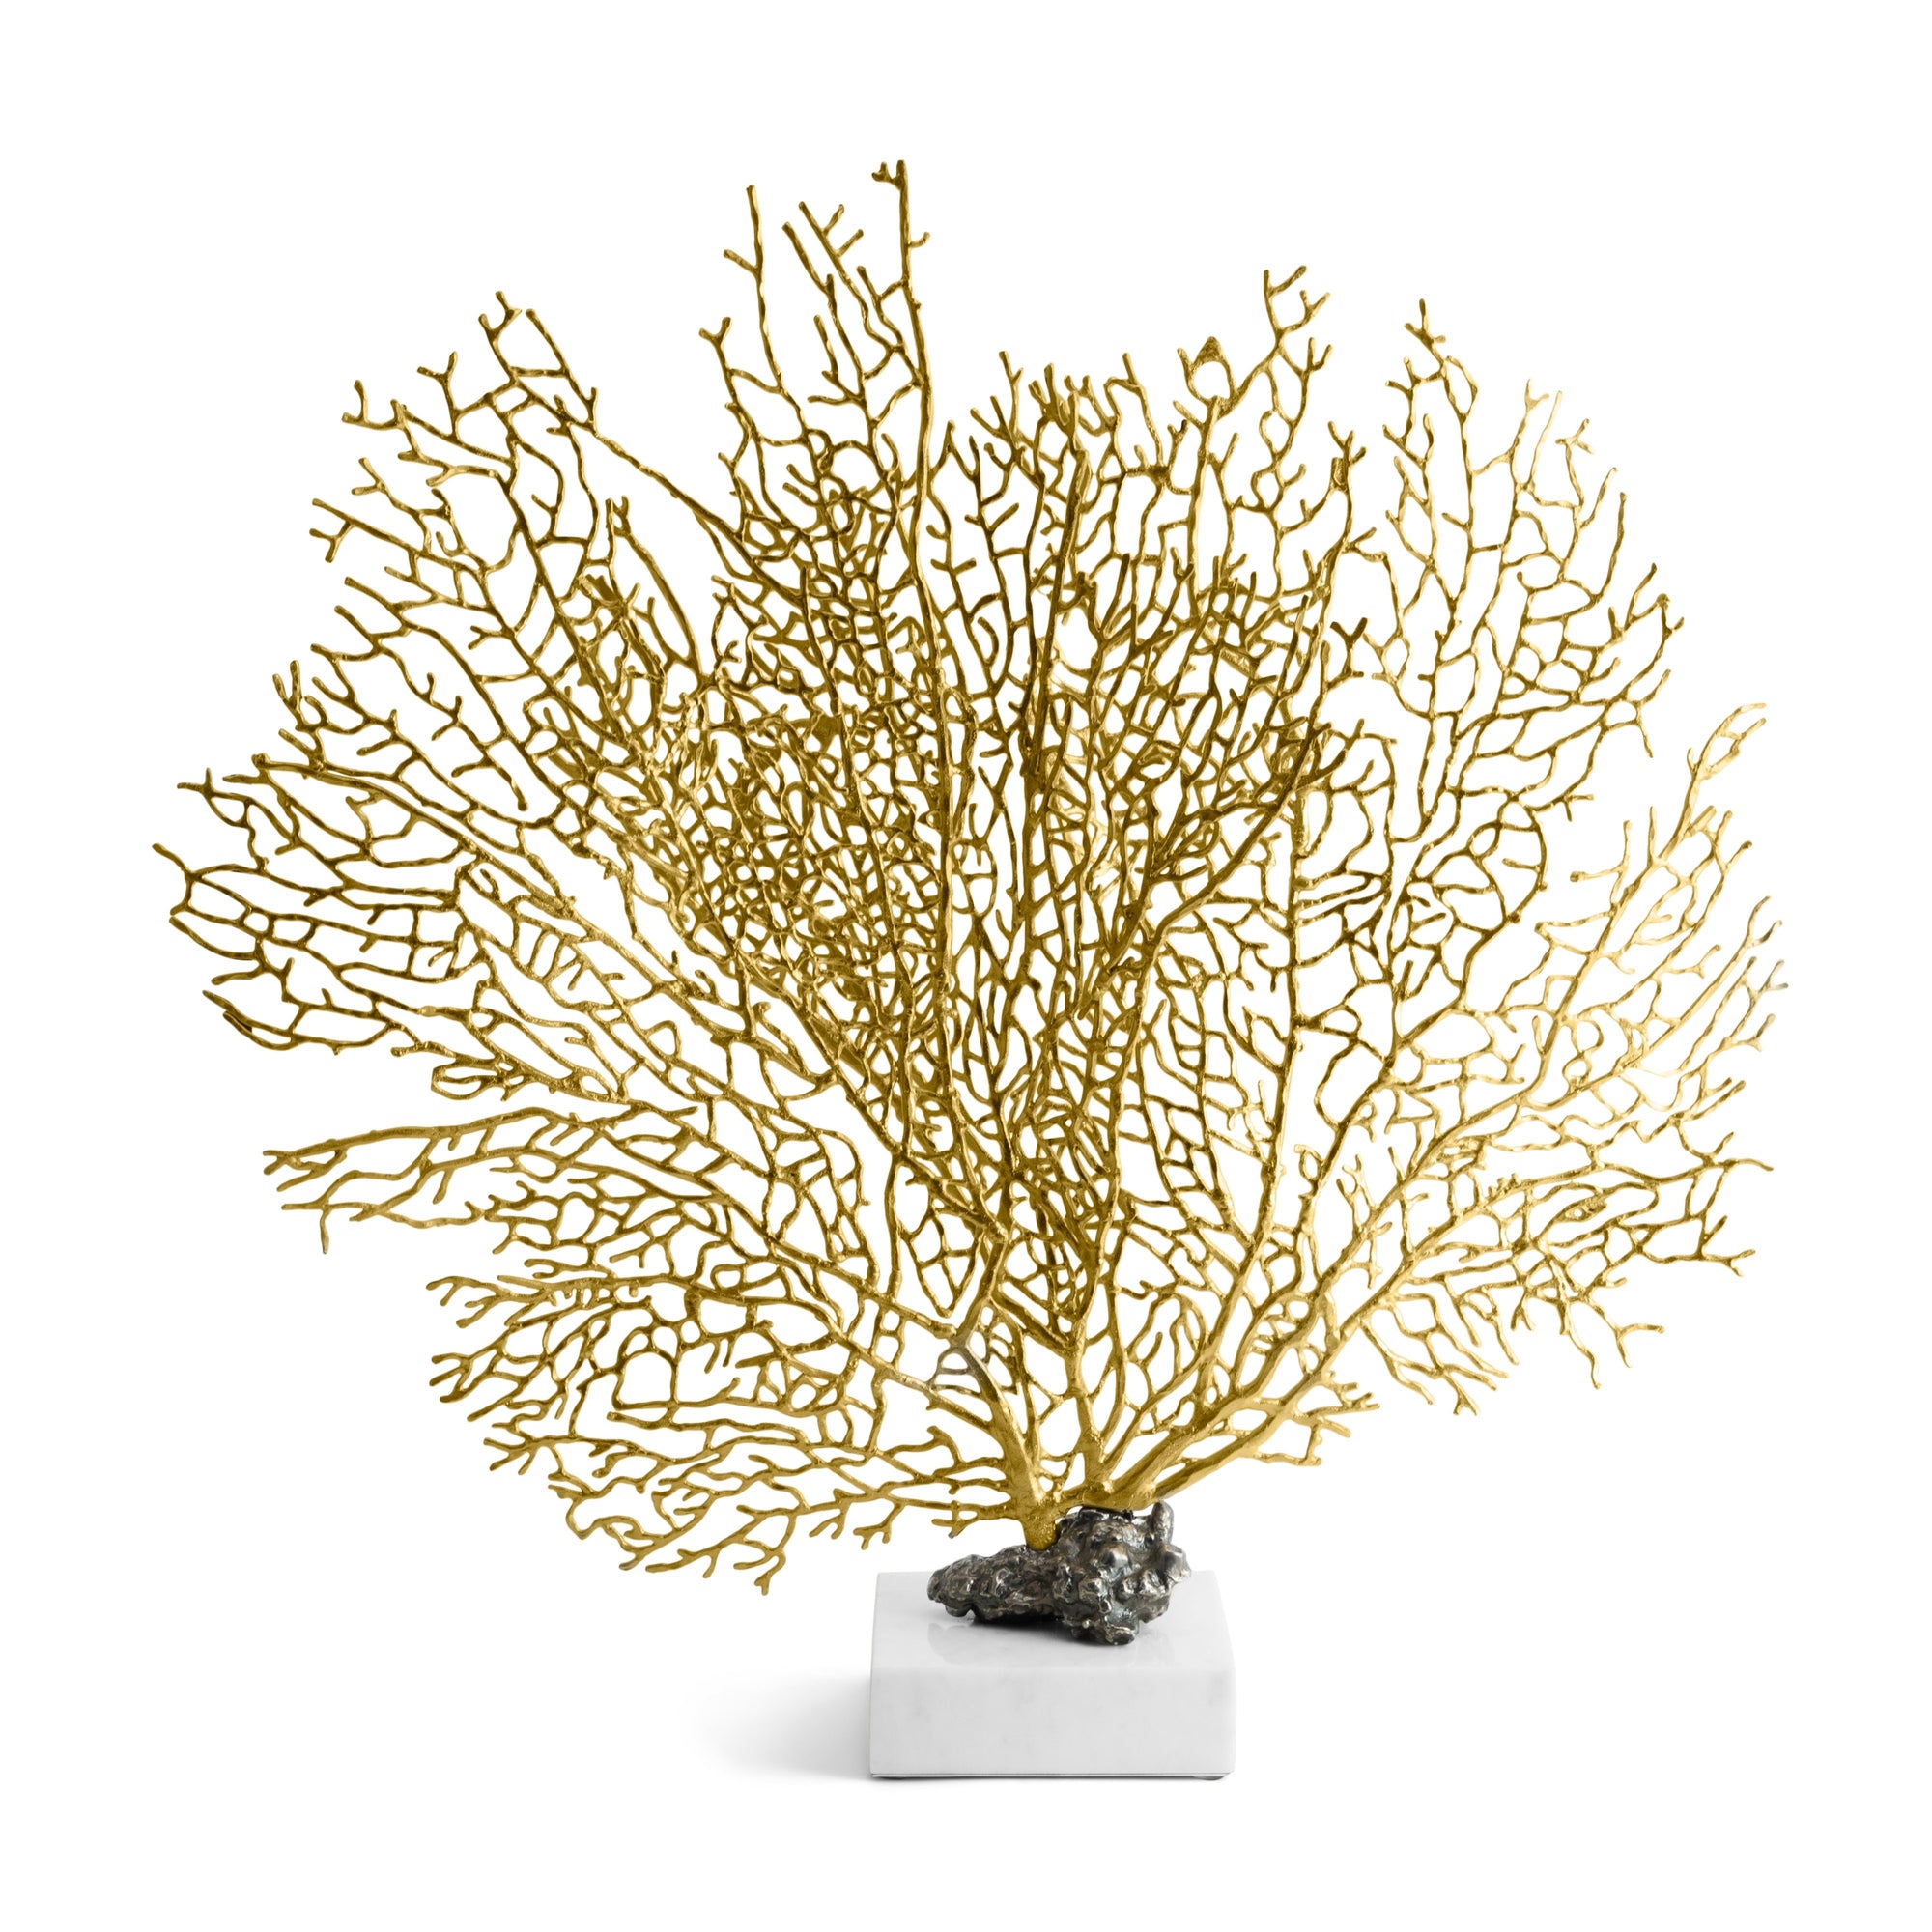 Michael Aram Fan Coral Gold (Limited Edition of 500)